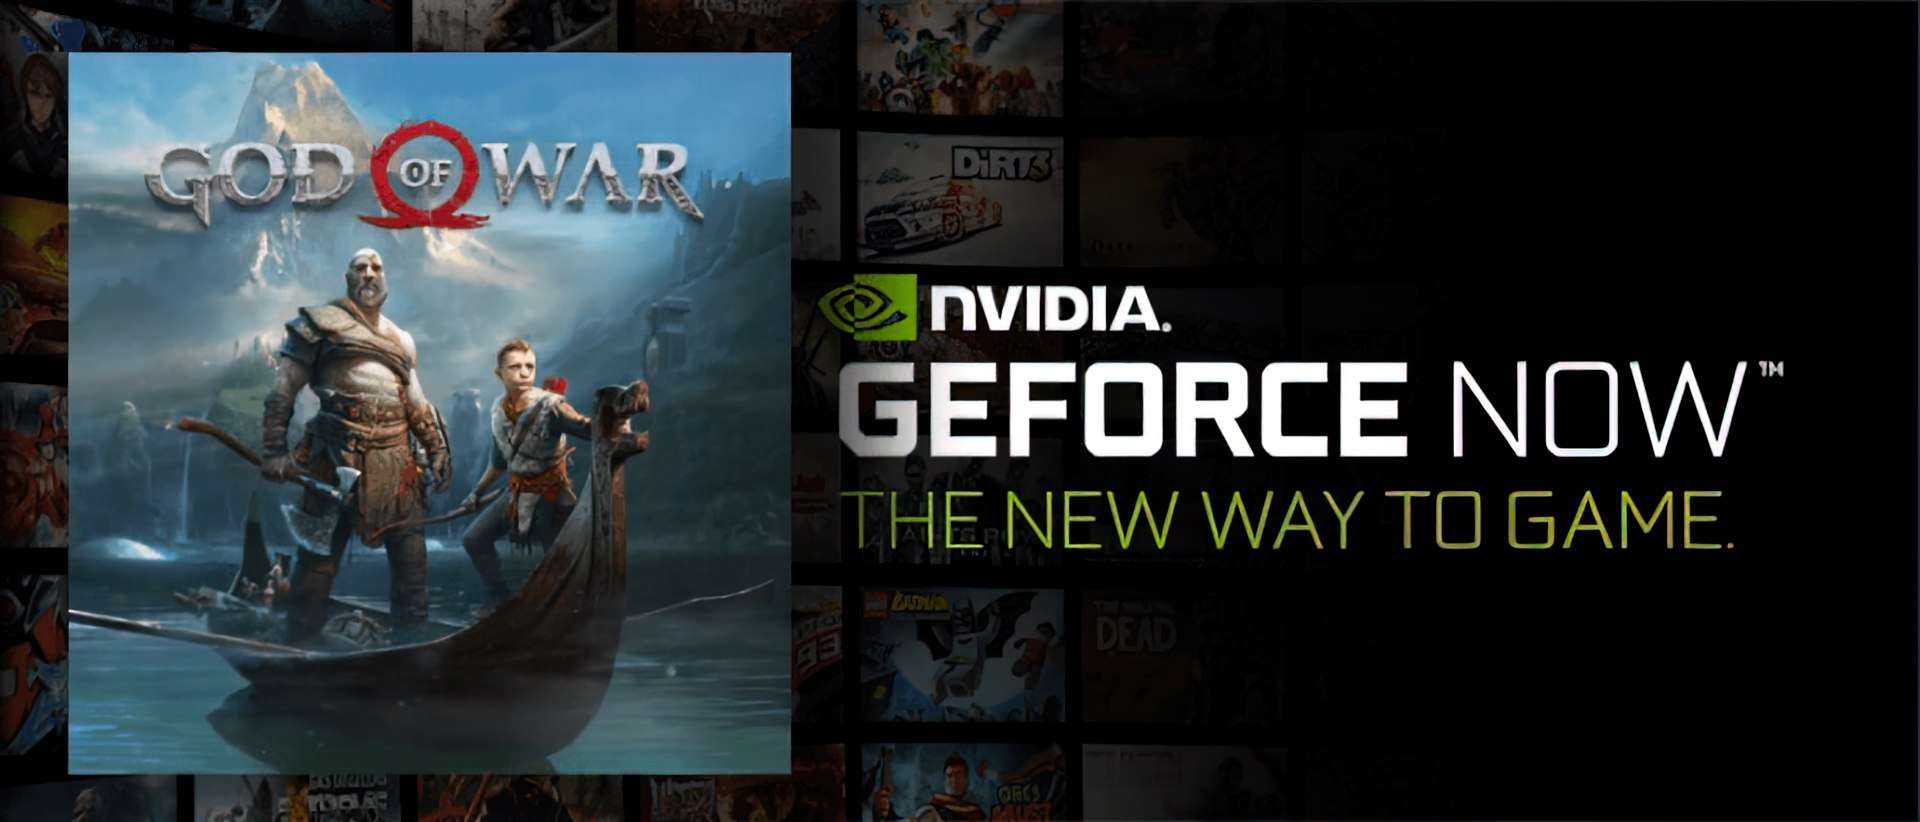 Is God of War GeForce Now news are true?